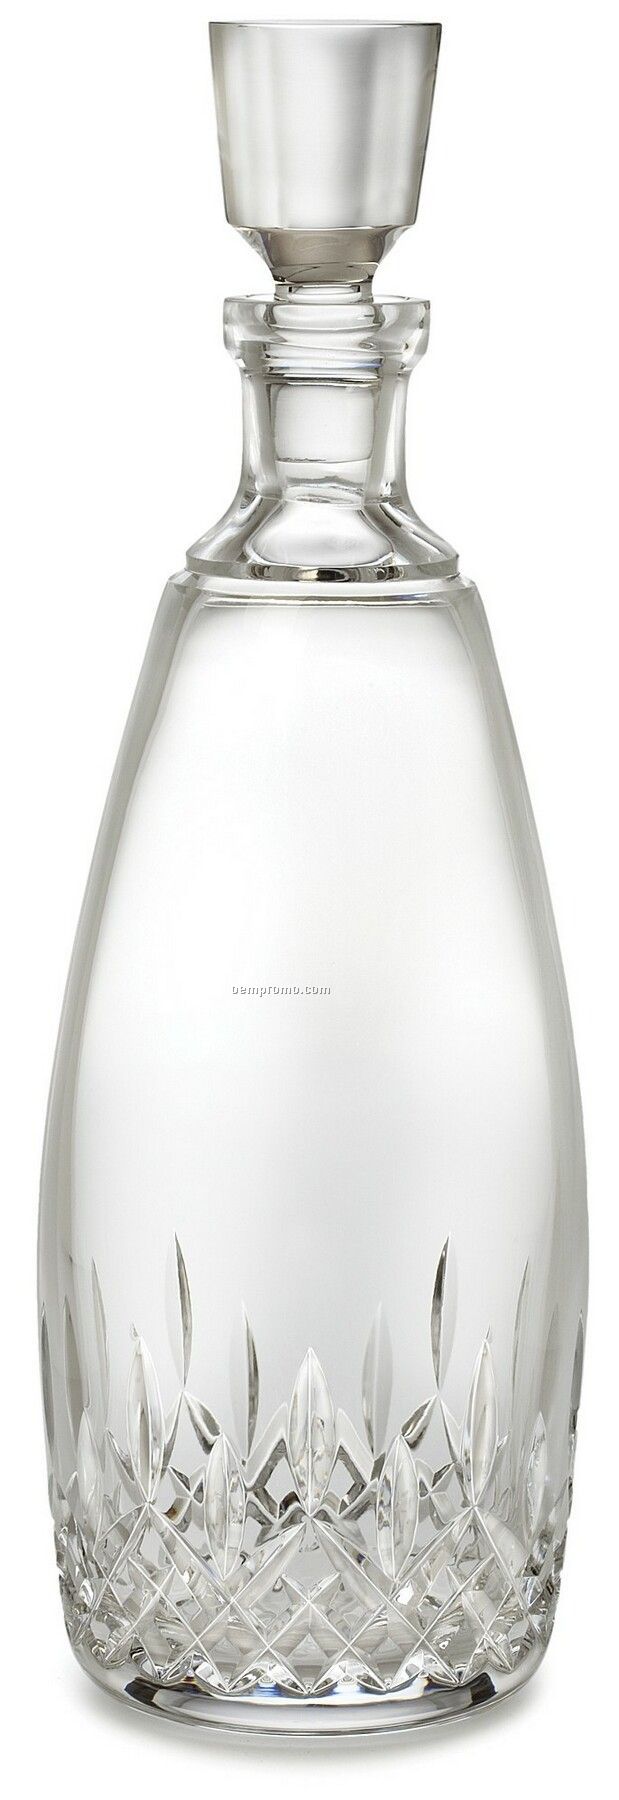 Waterford Lismore Essence Decanter